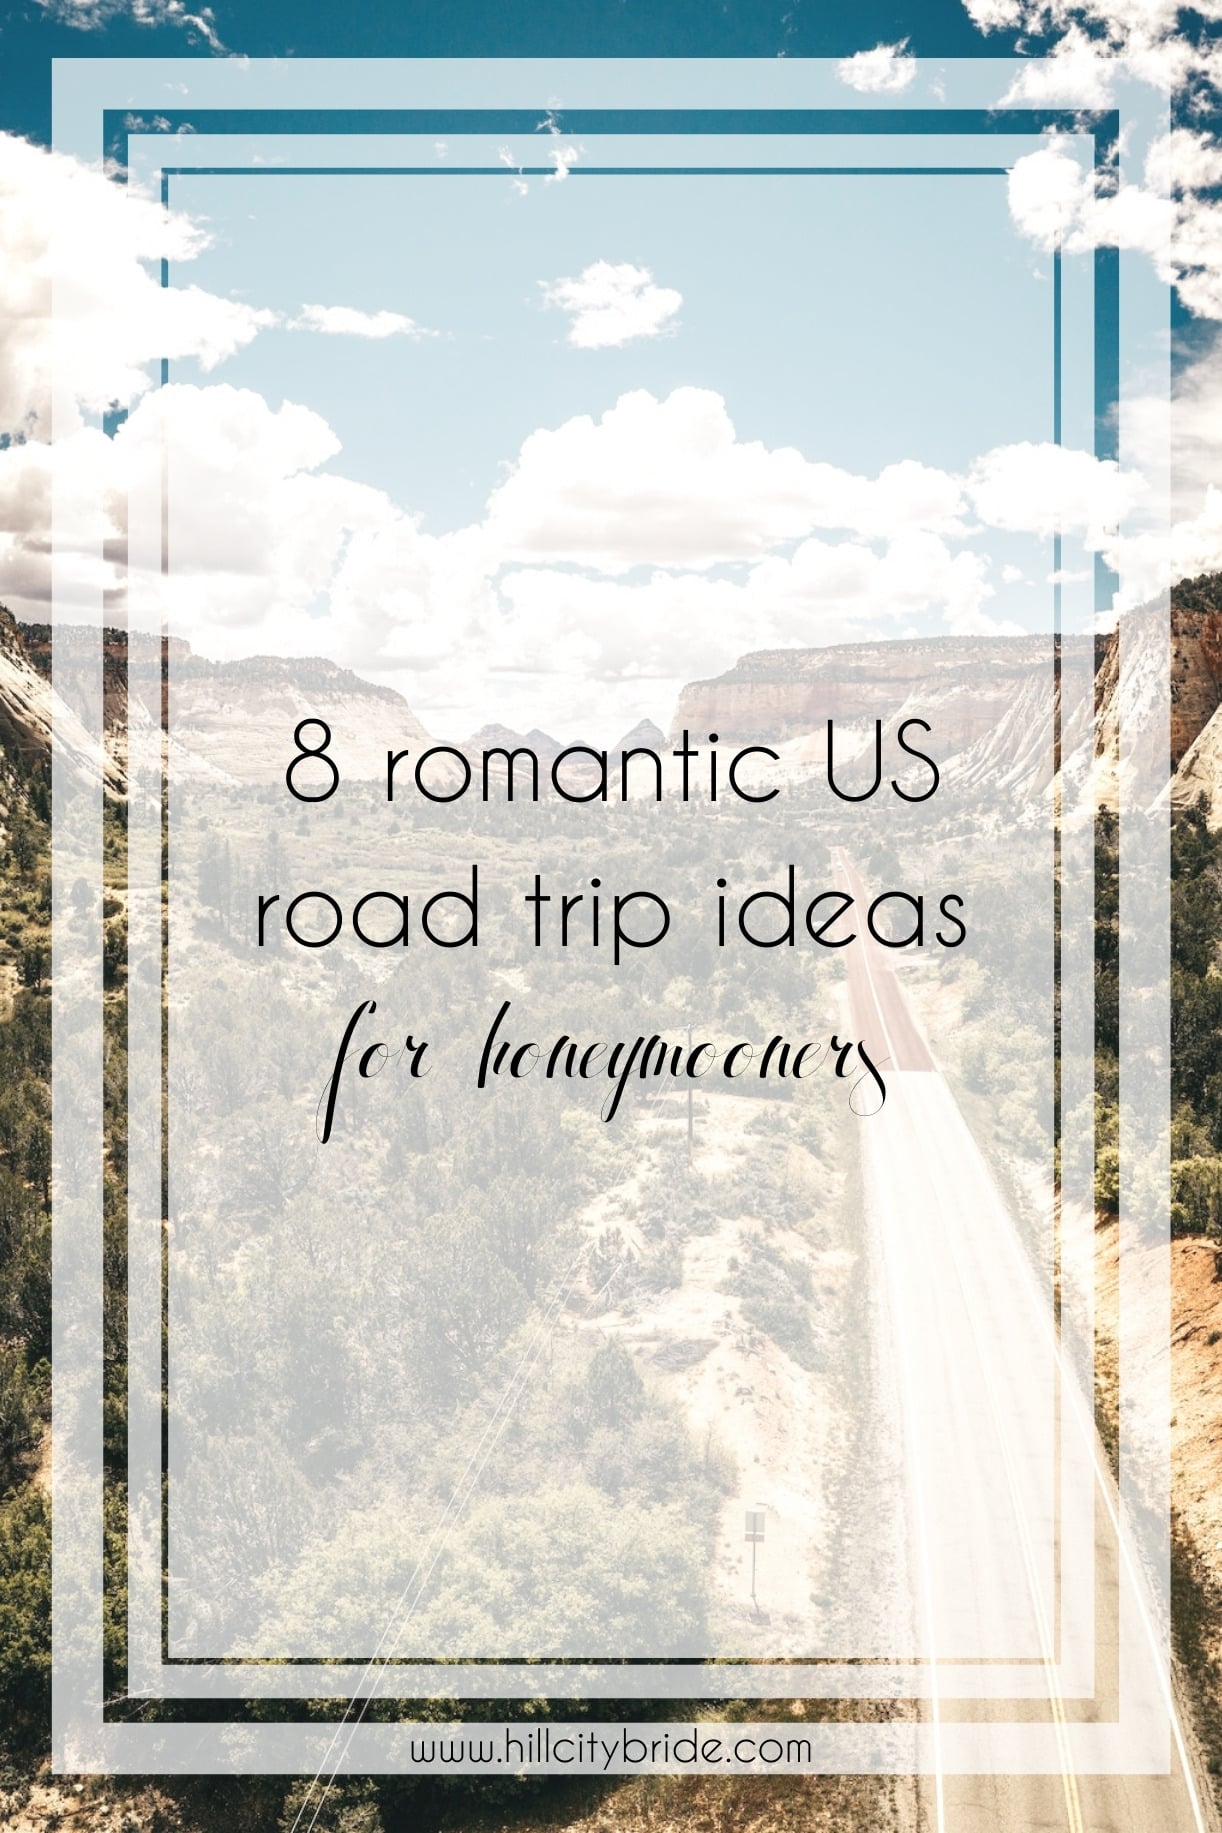 8 of the Best Romantic Road Trip Ideas for Honeymooners in the US